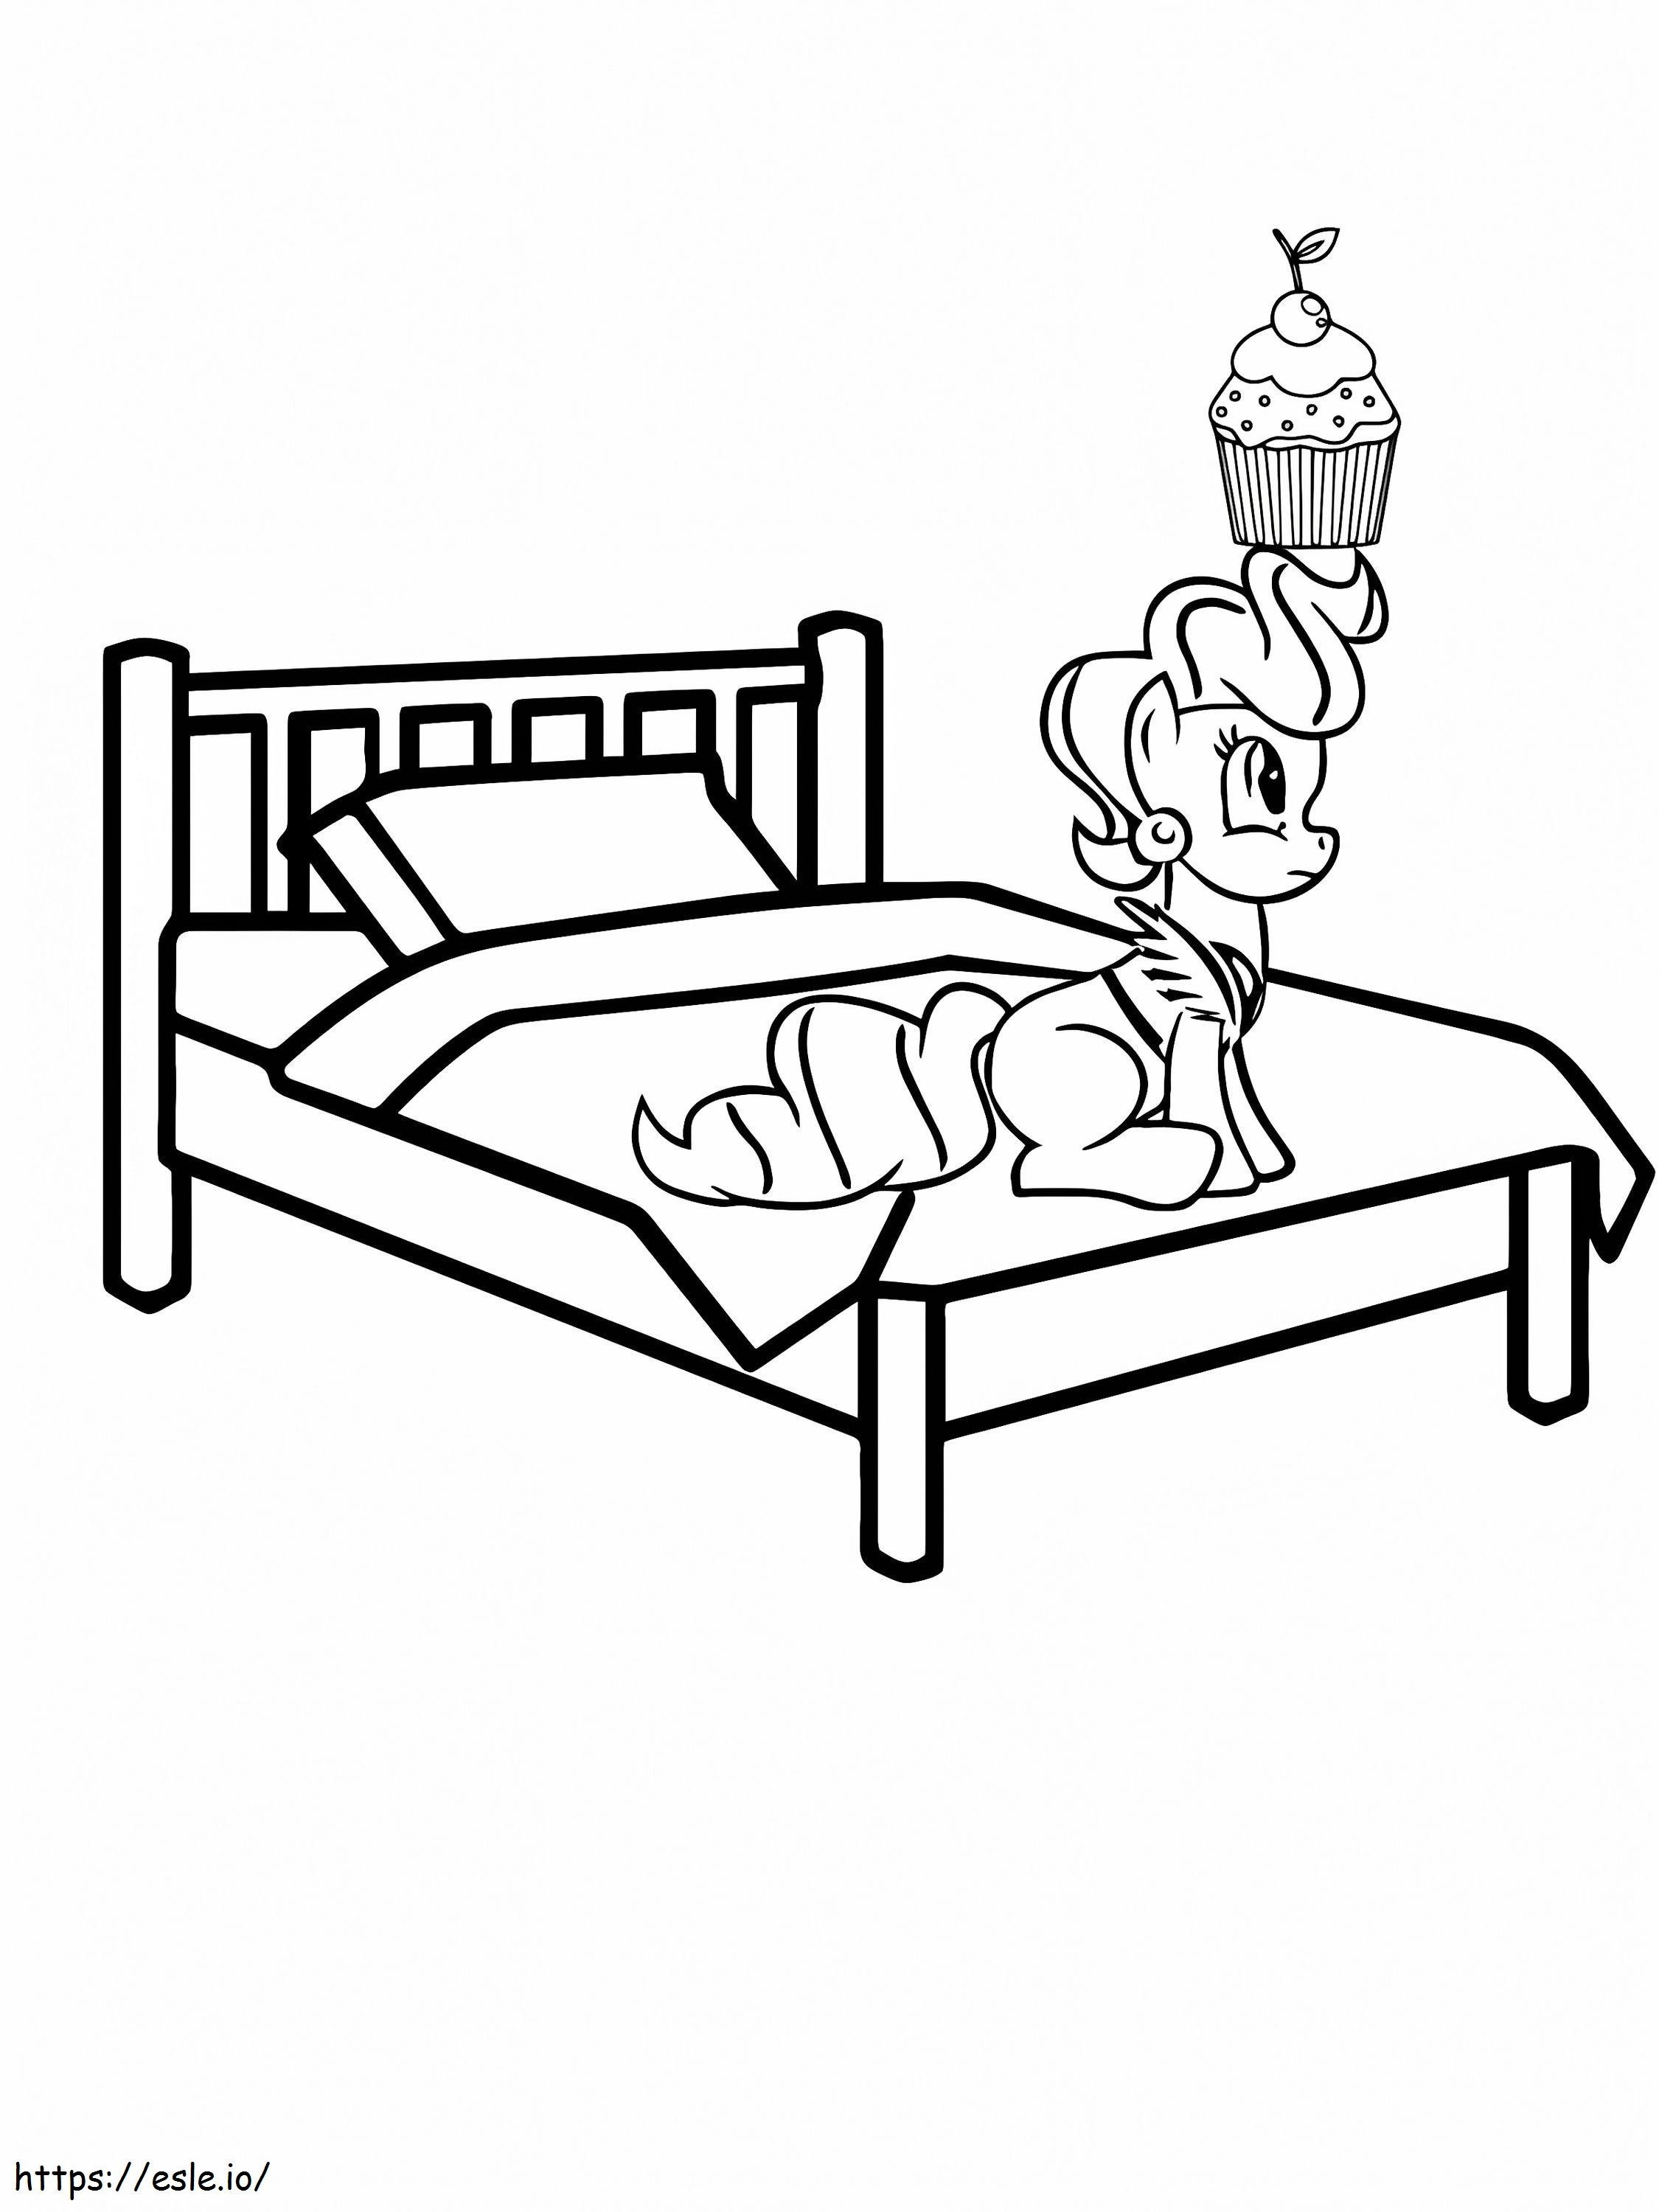 Mrs Cake In Bed coloring page